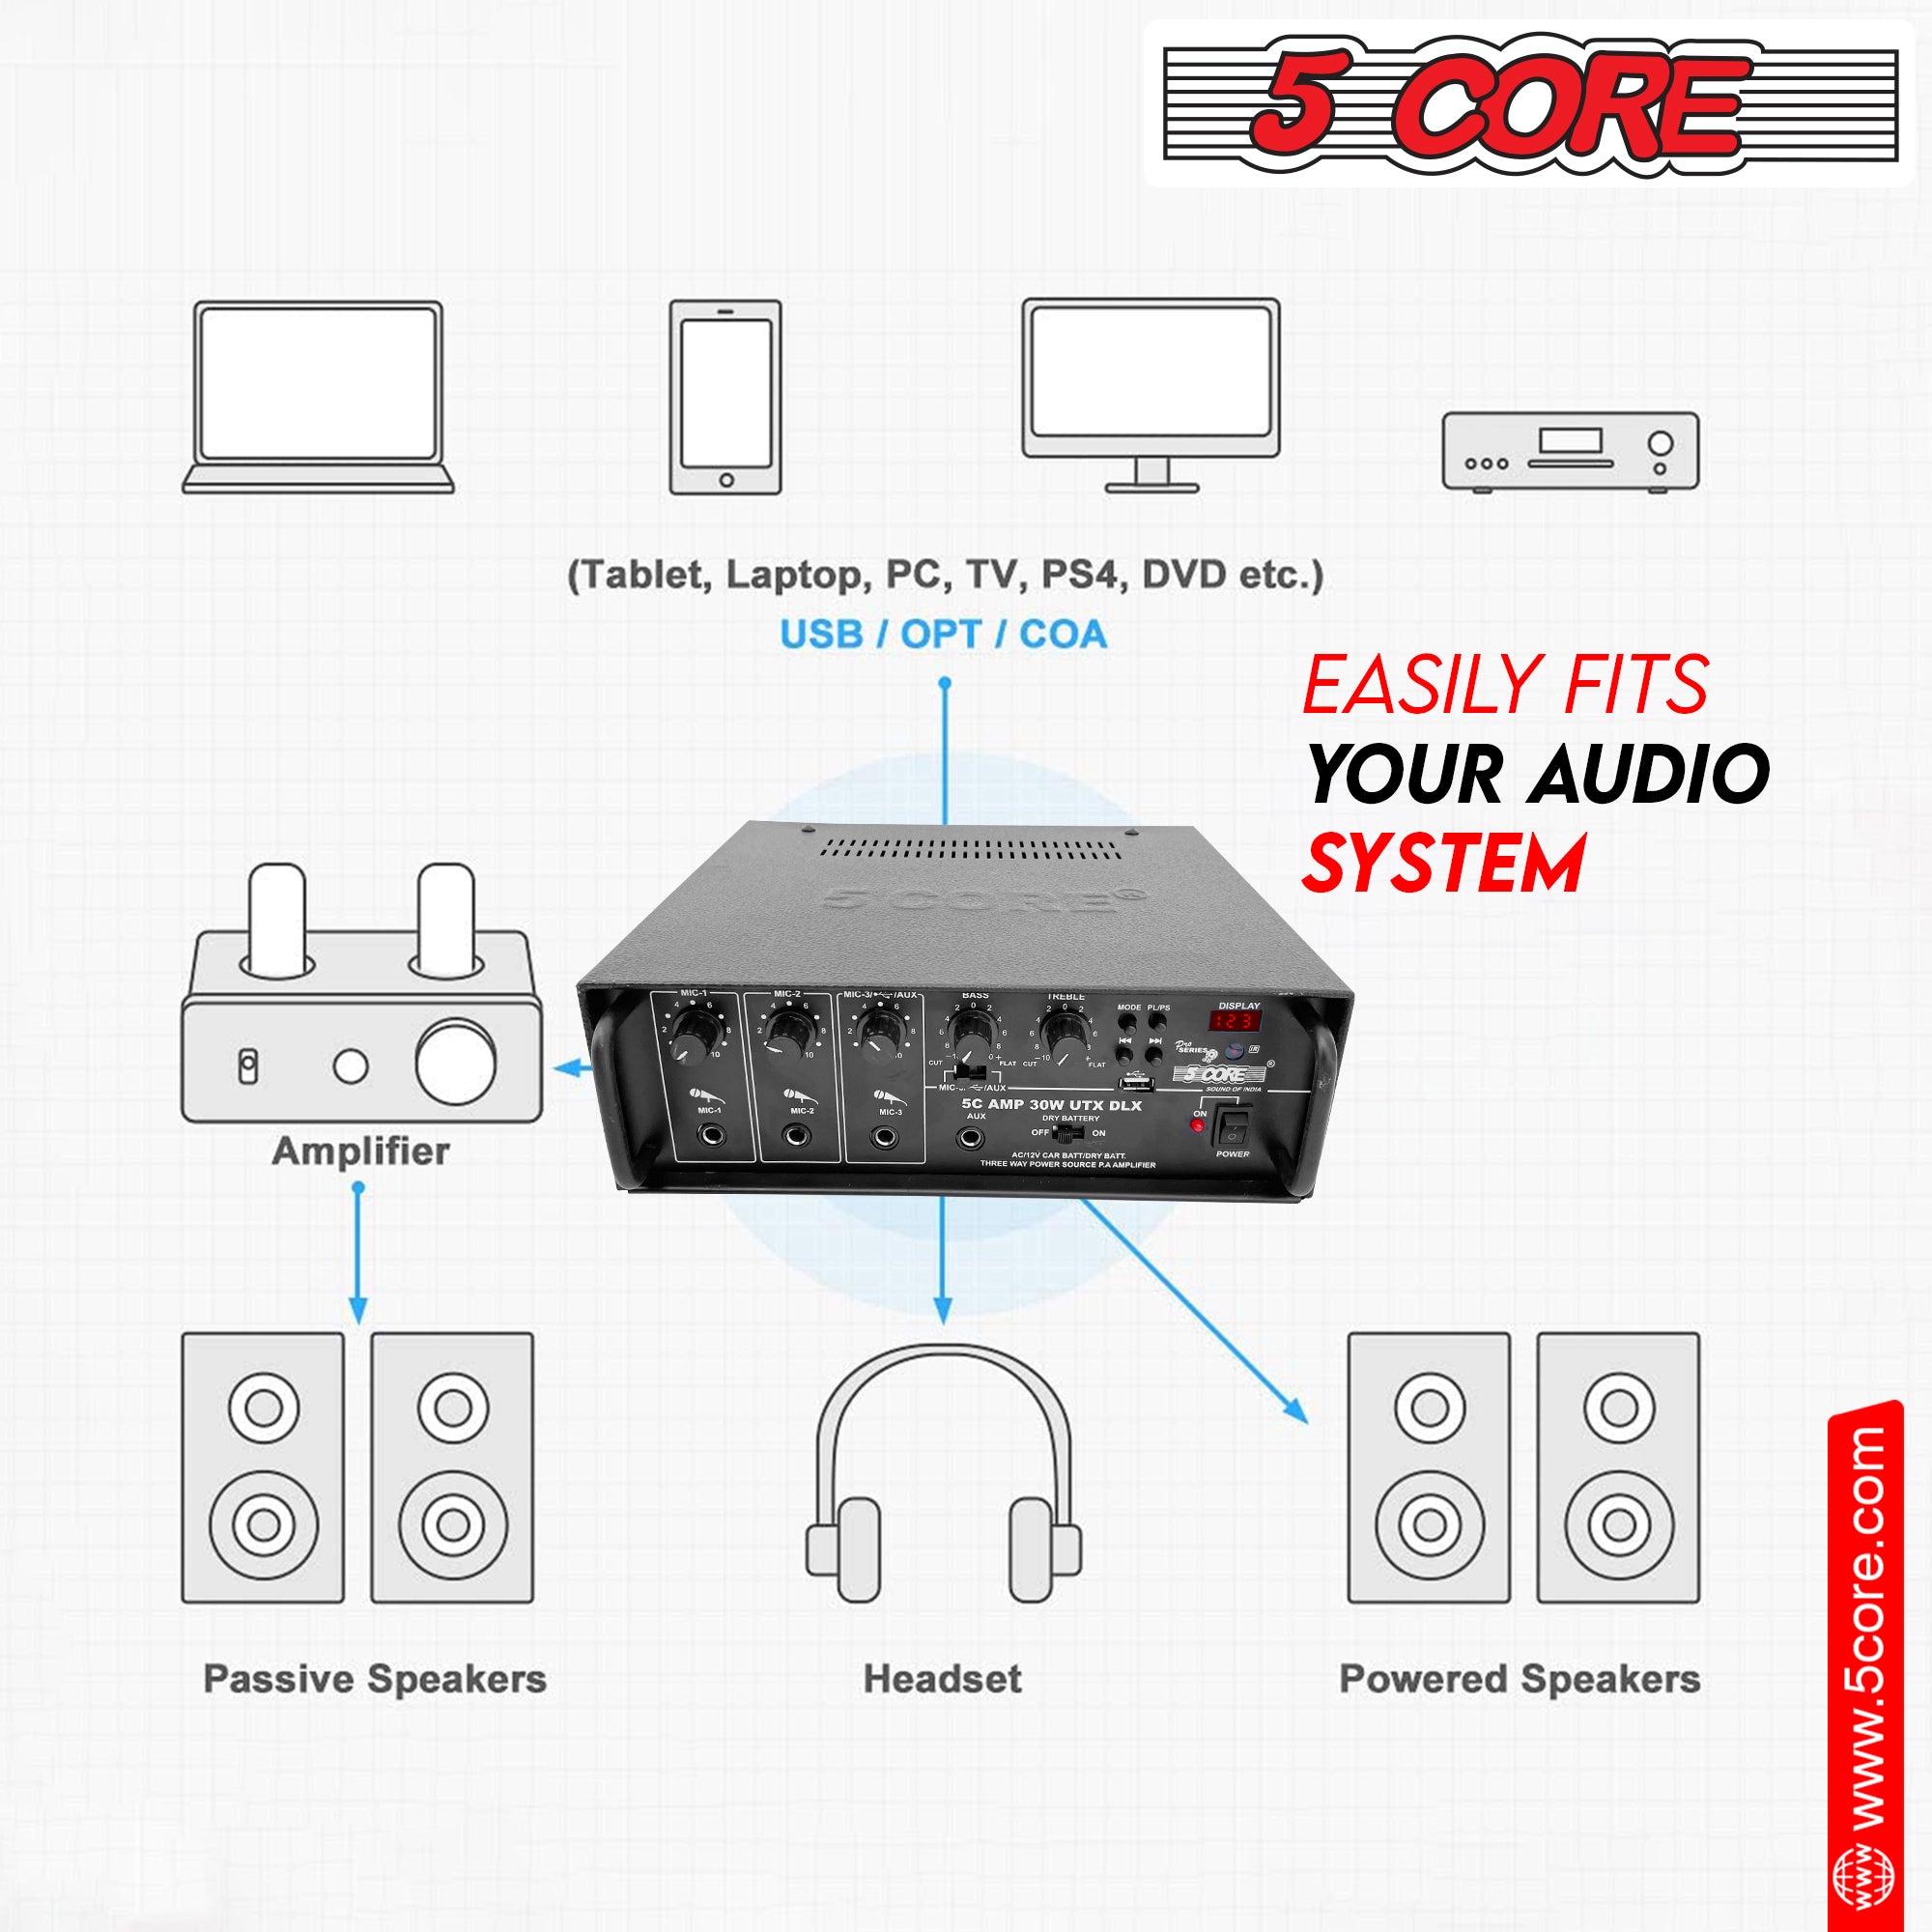 5 Core Amplifier easily fits your audio system